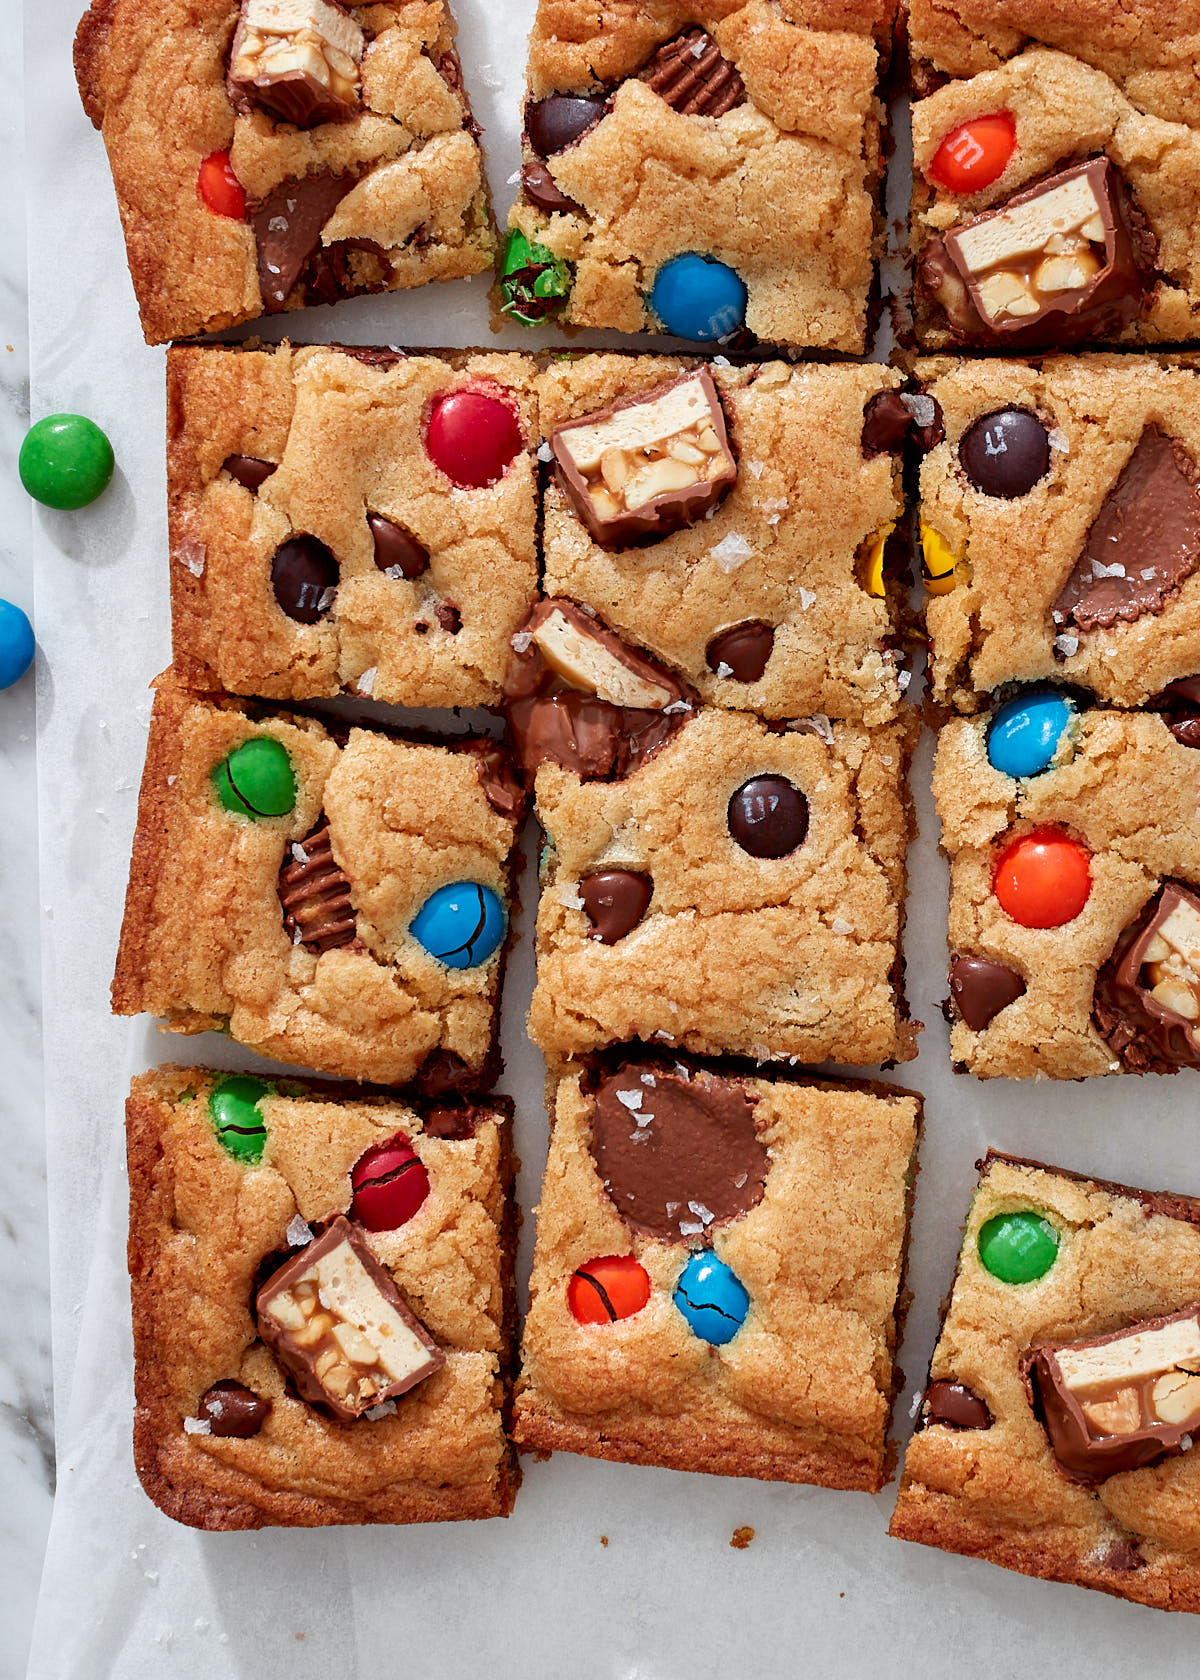 Candy bar blondies, with M&Ms, Snickers, and Reese's peanut butter cups on white parchment paper.